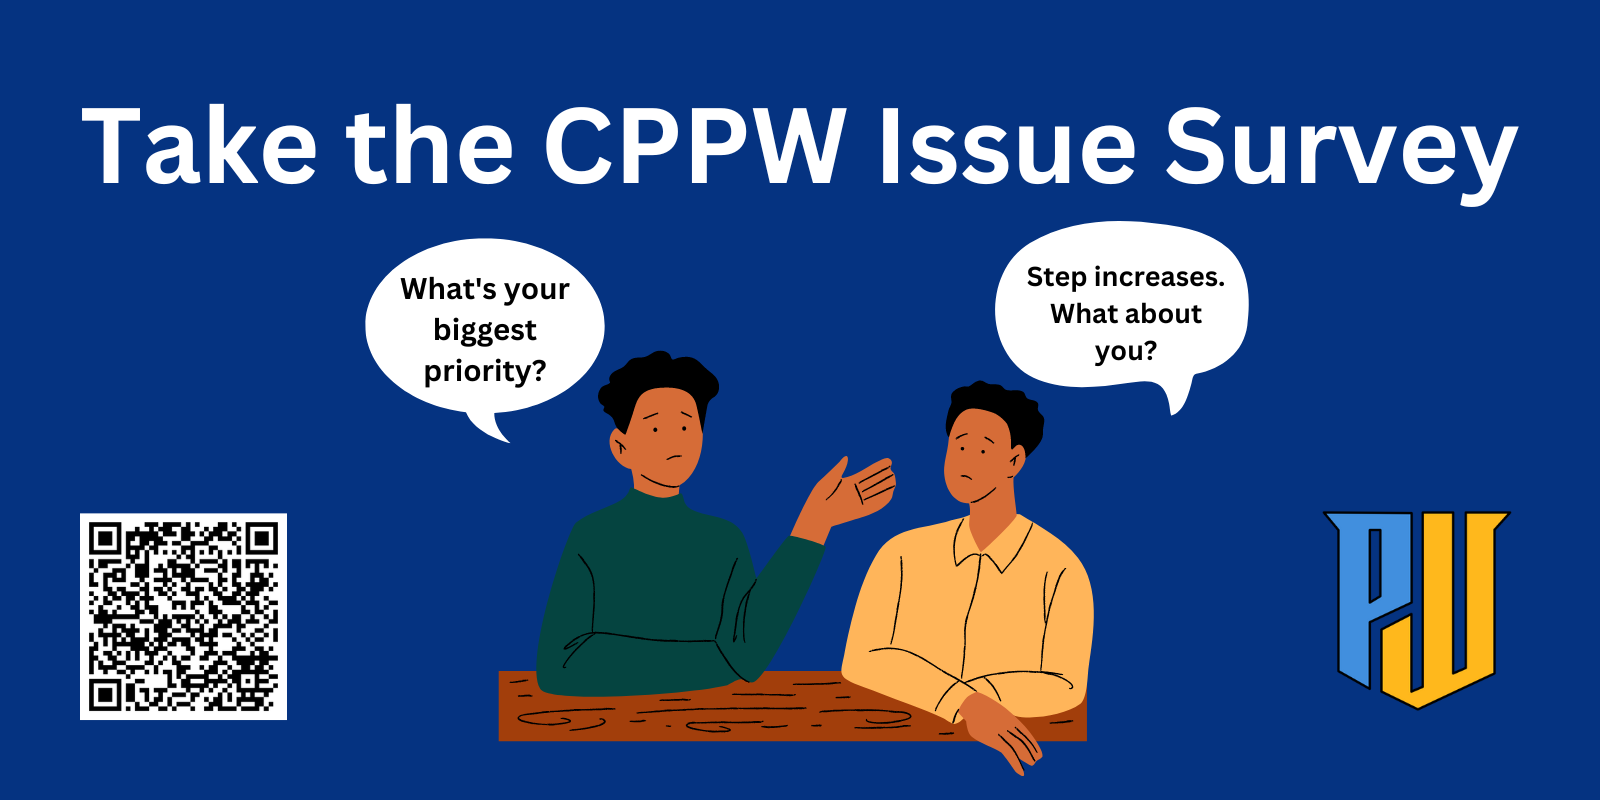 Take the CPPW Issue Survey and Share Your Priorities